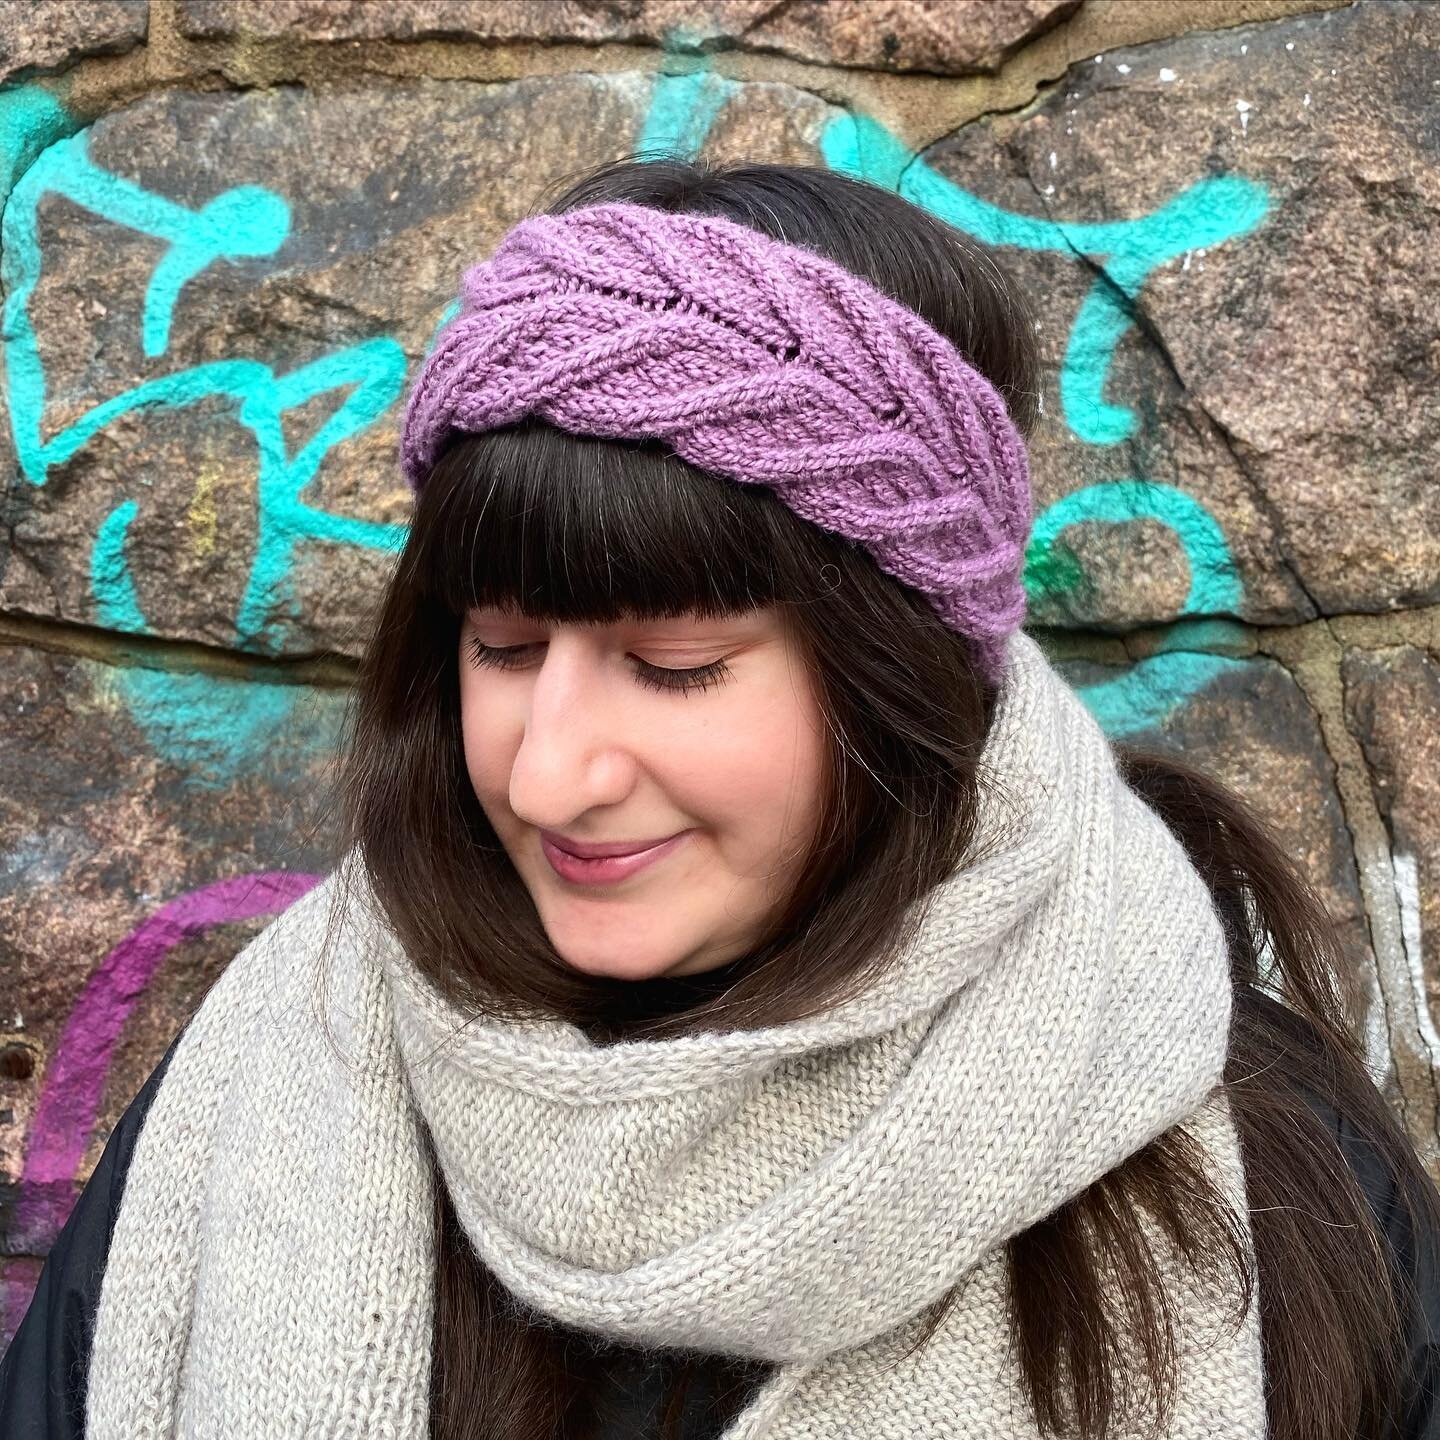 Here&rsquo;s the finished headband from my reel last week. Thank you for the amount of love and support you&rsquo;ve shown Take Heart: A Transatlantic Knitting Journey over the years. 💜

This new Queensland Beach Headband is knit in @lllimani&rsquo;